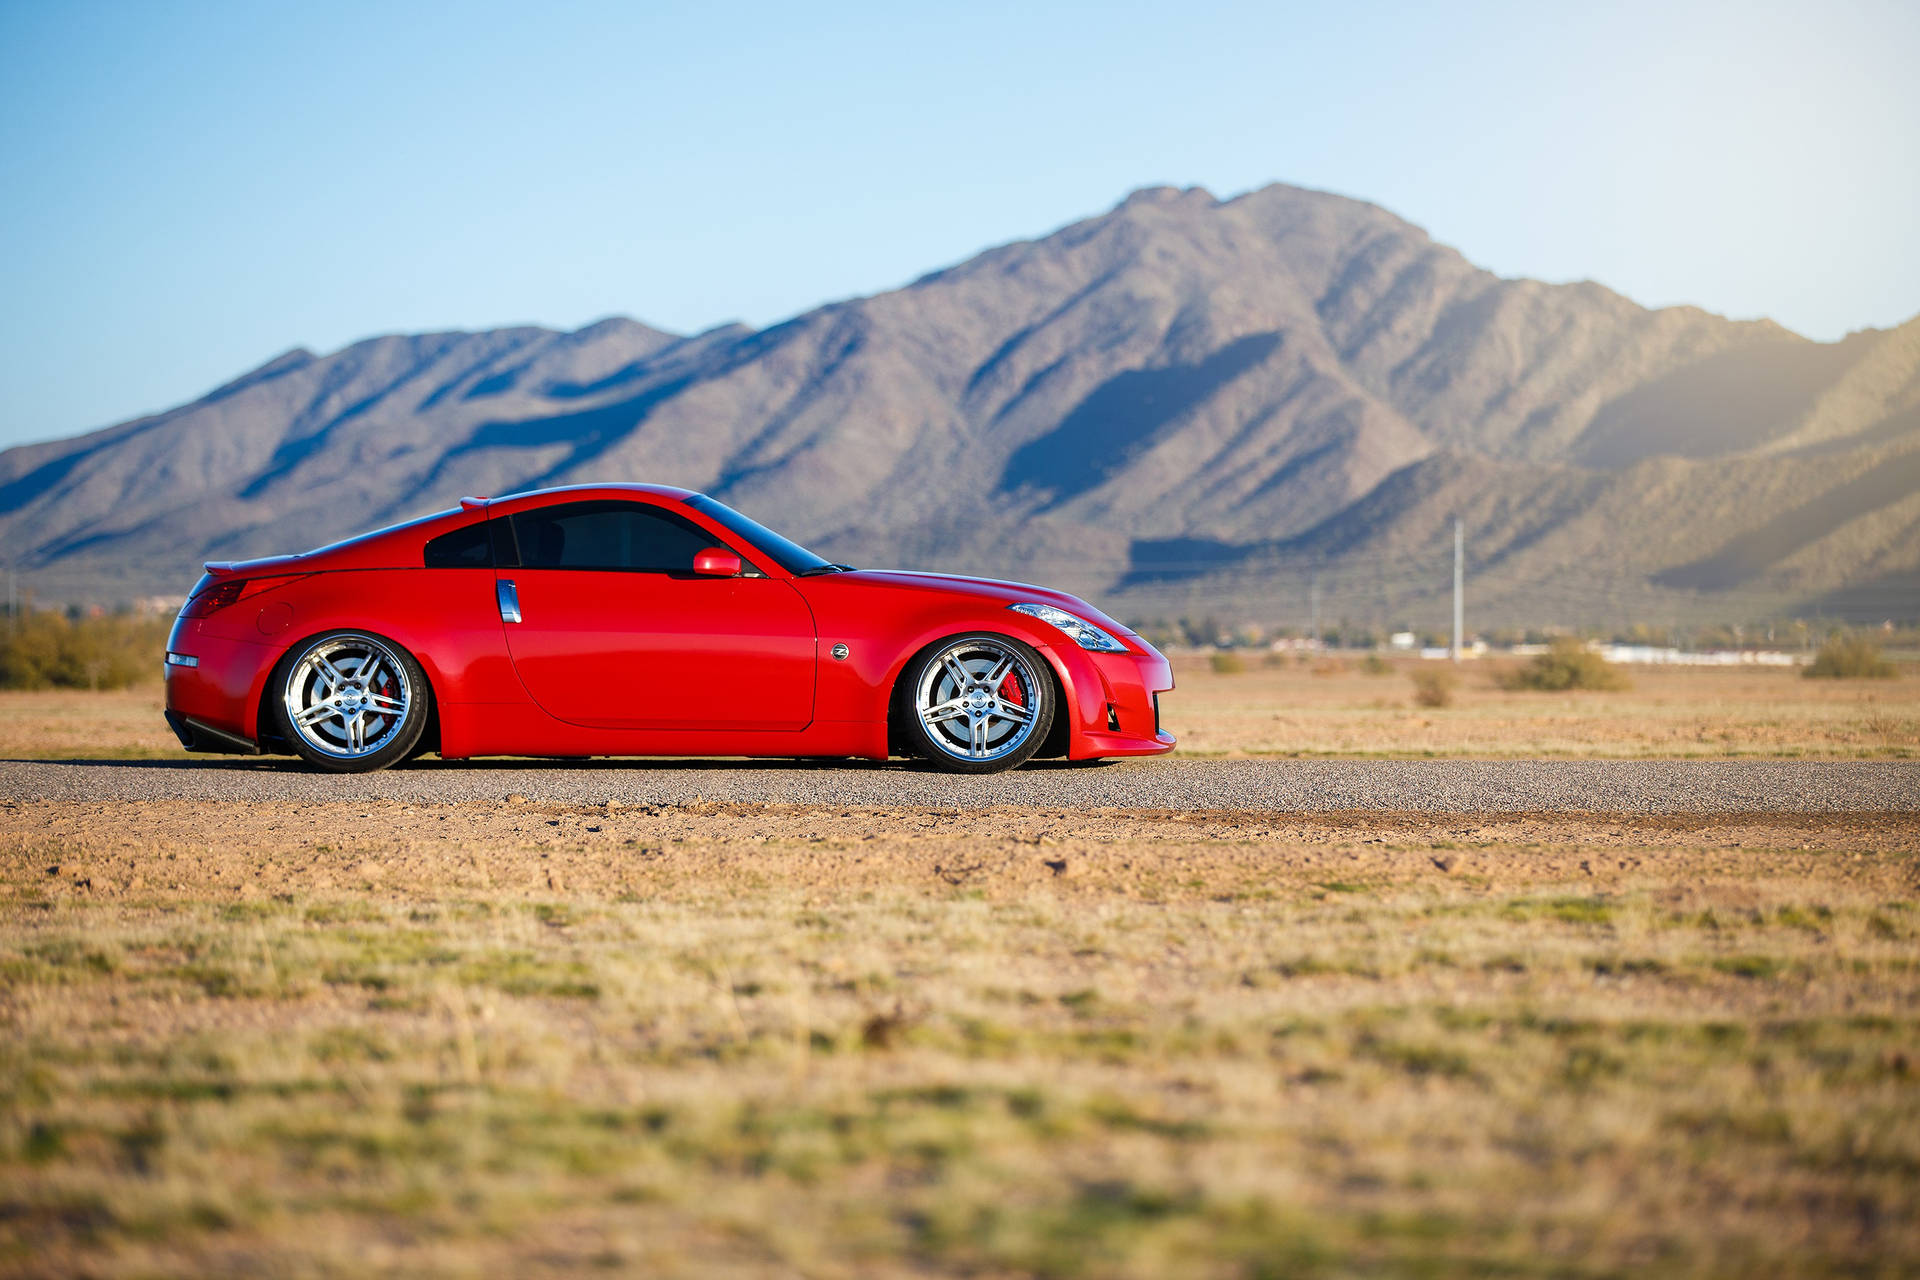 “Enjoy the Thrill of the Drive with the Powerful Nissan 350z” Wallpaper